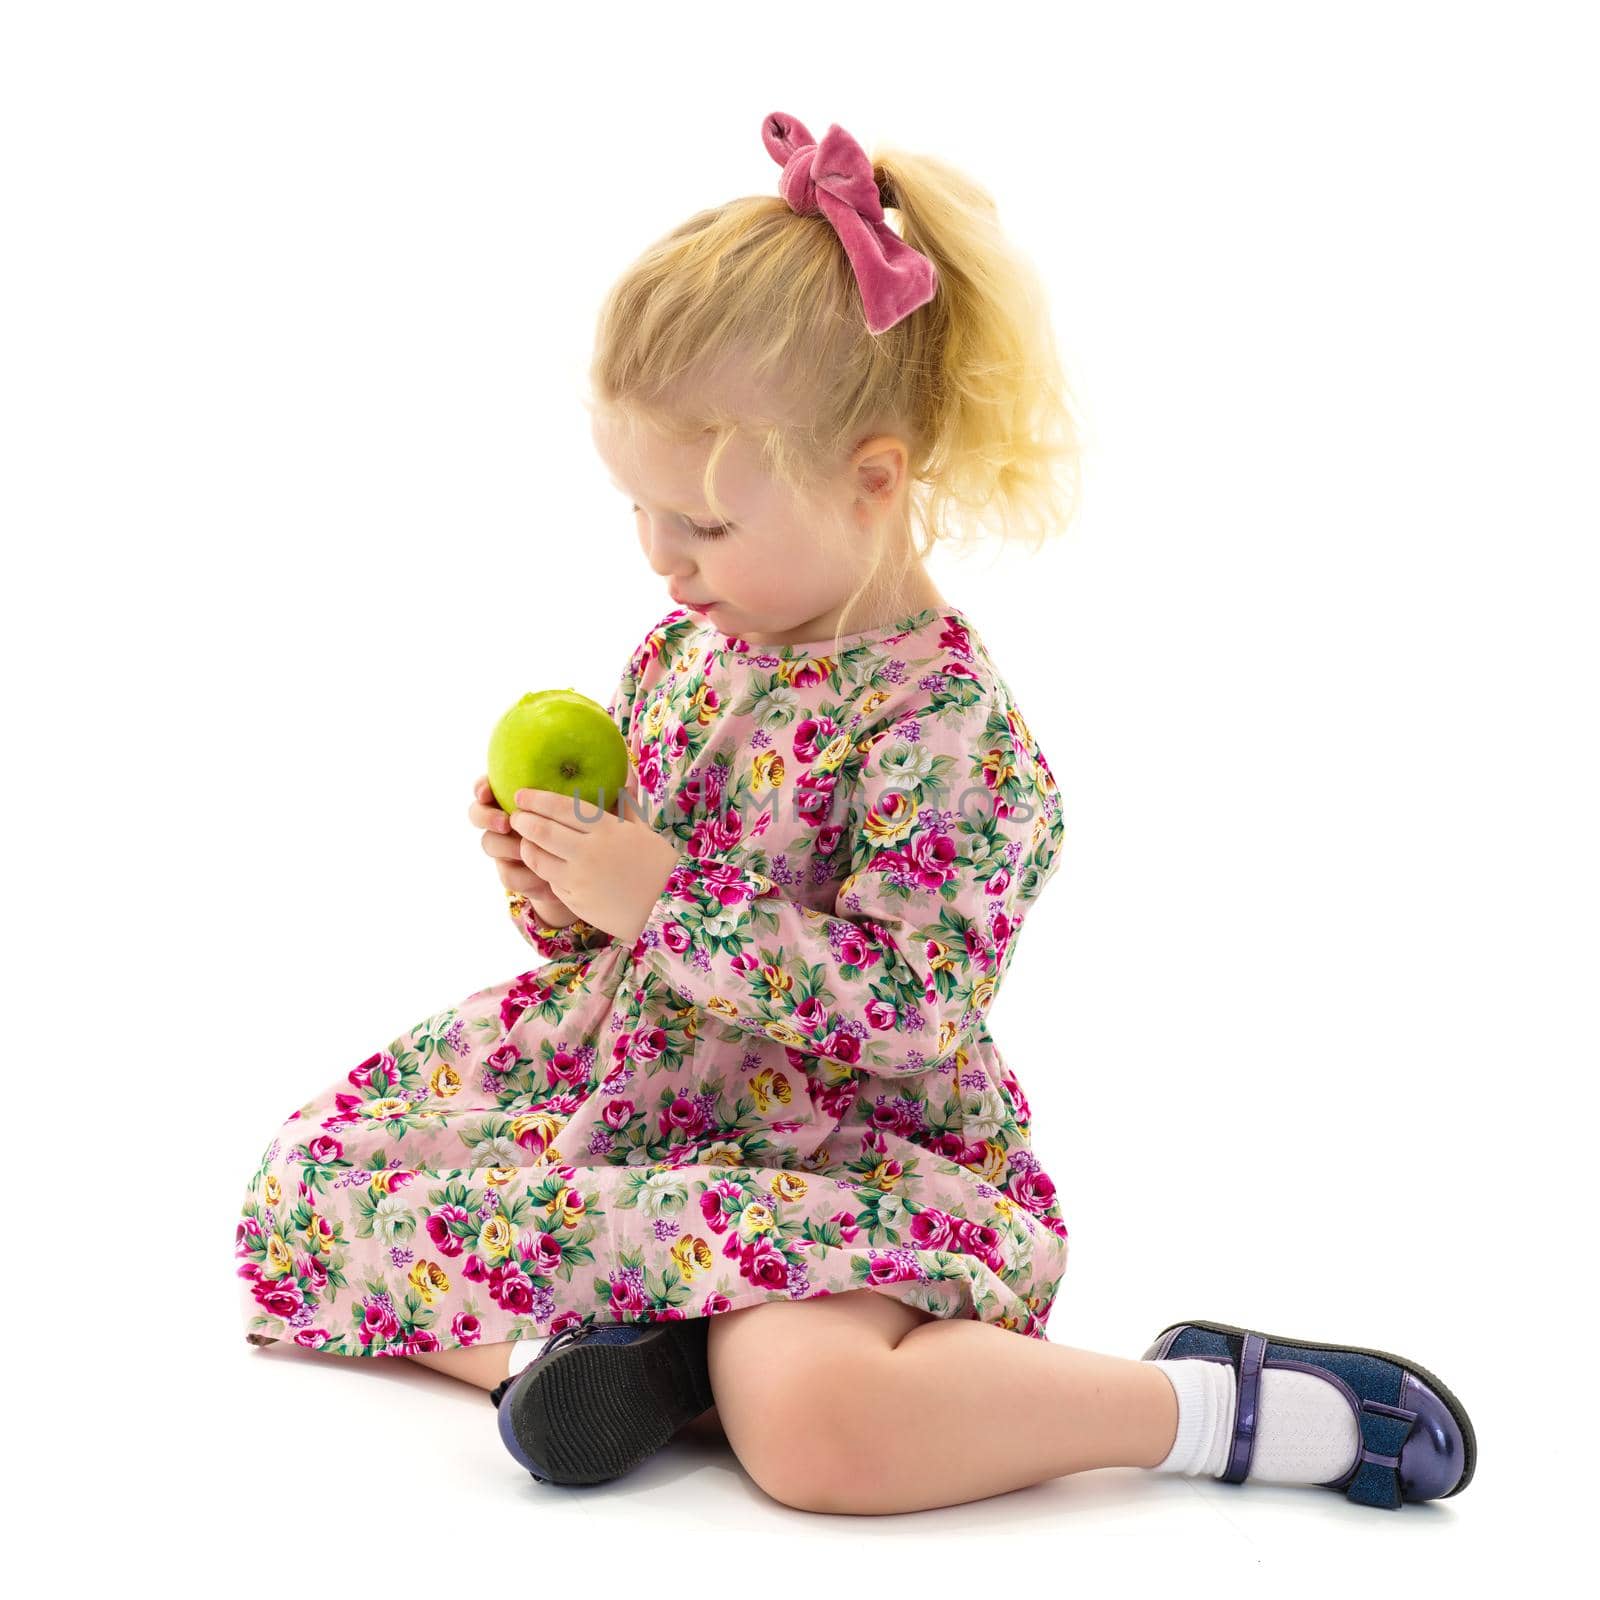 Little girl with an apple. Concept of healthy eating, harvesting. Isolated on white background.